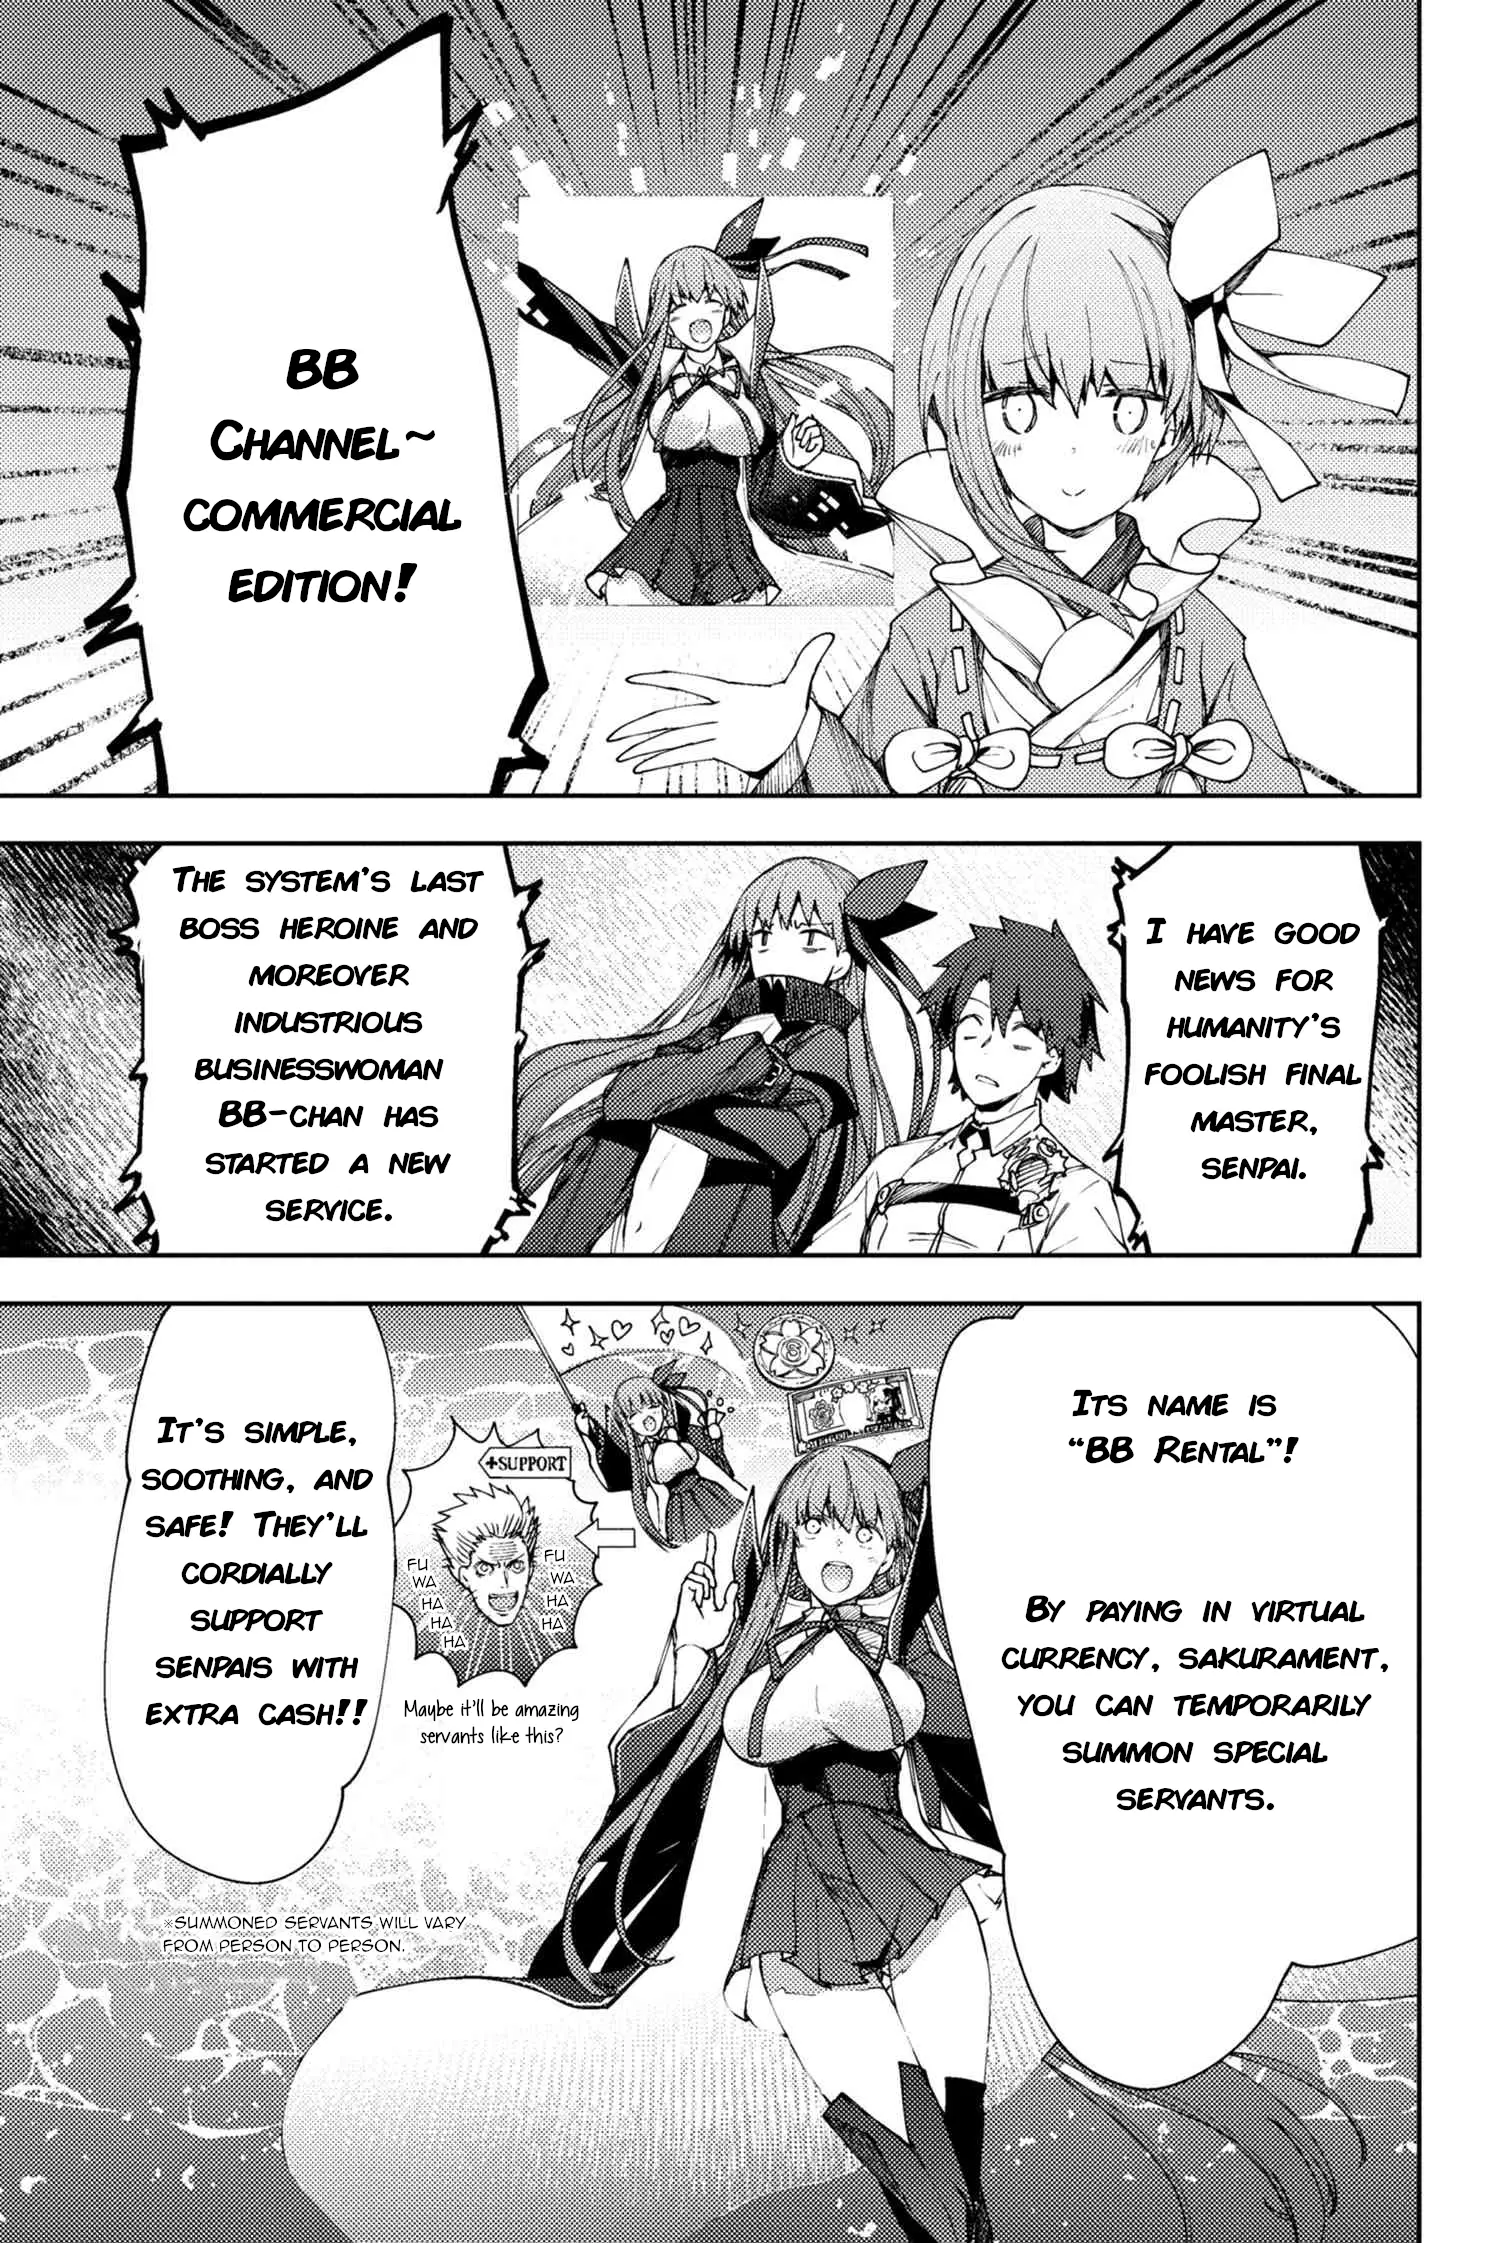 Fate/grand Order -Epic Of Remnant- Deep Sea Cyber-Paradise Se.ra.ph - 8.2 page 8